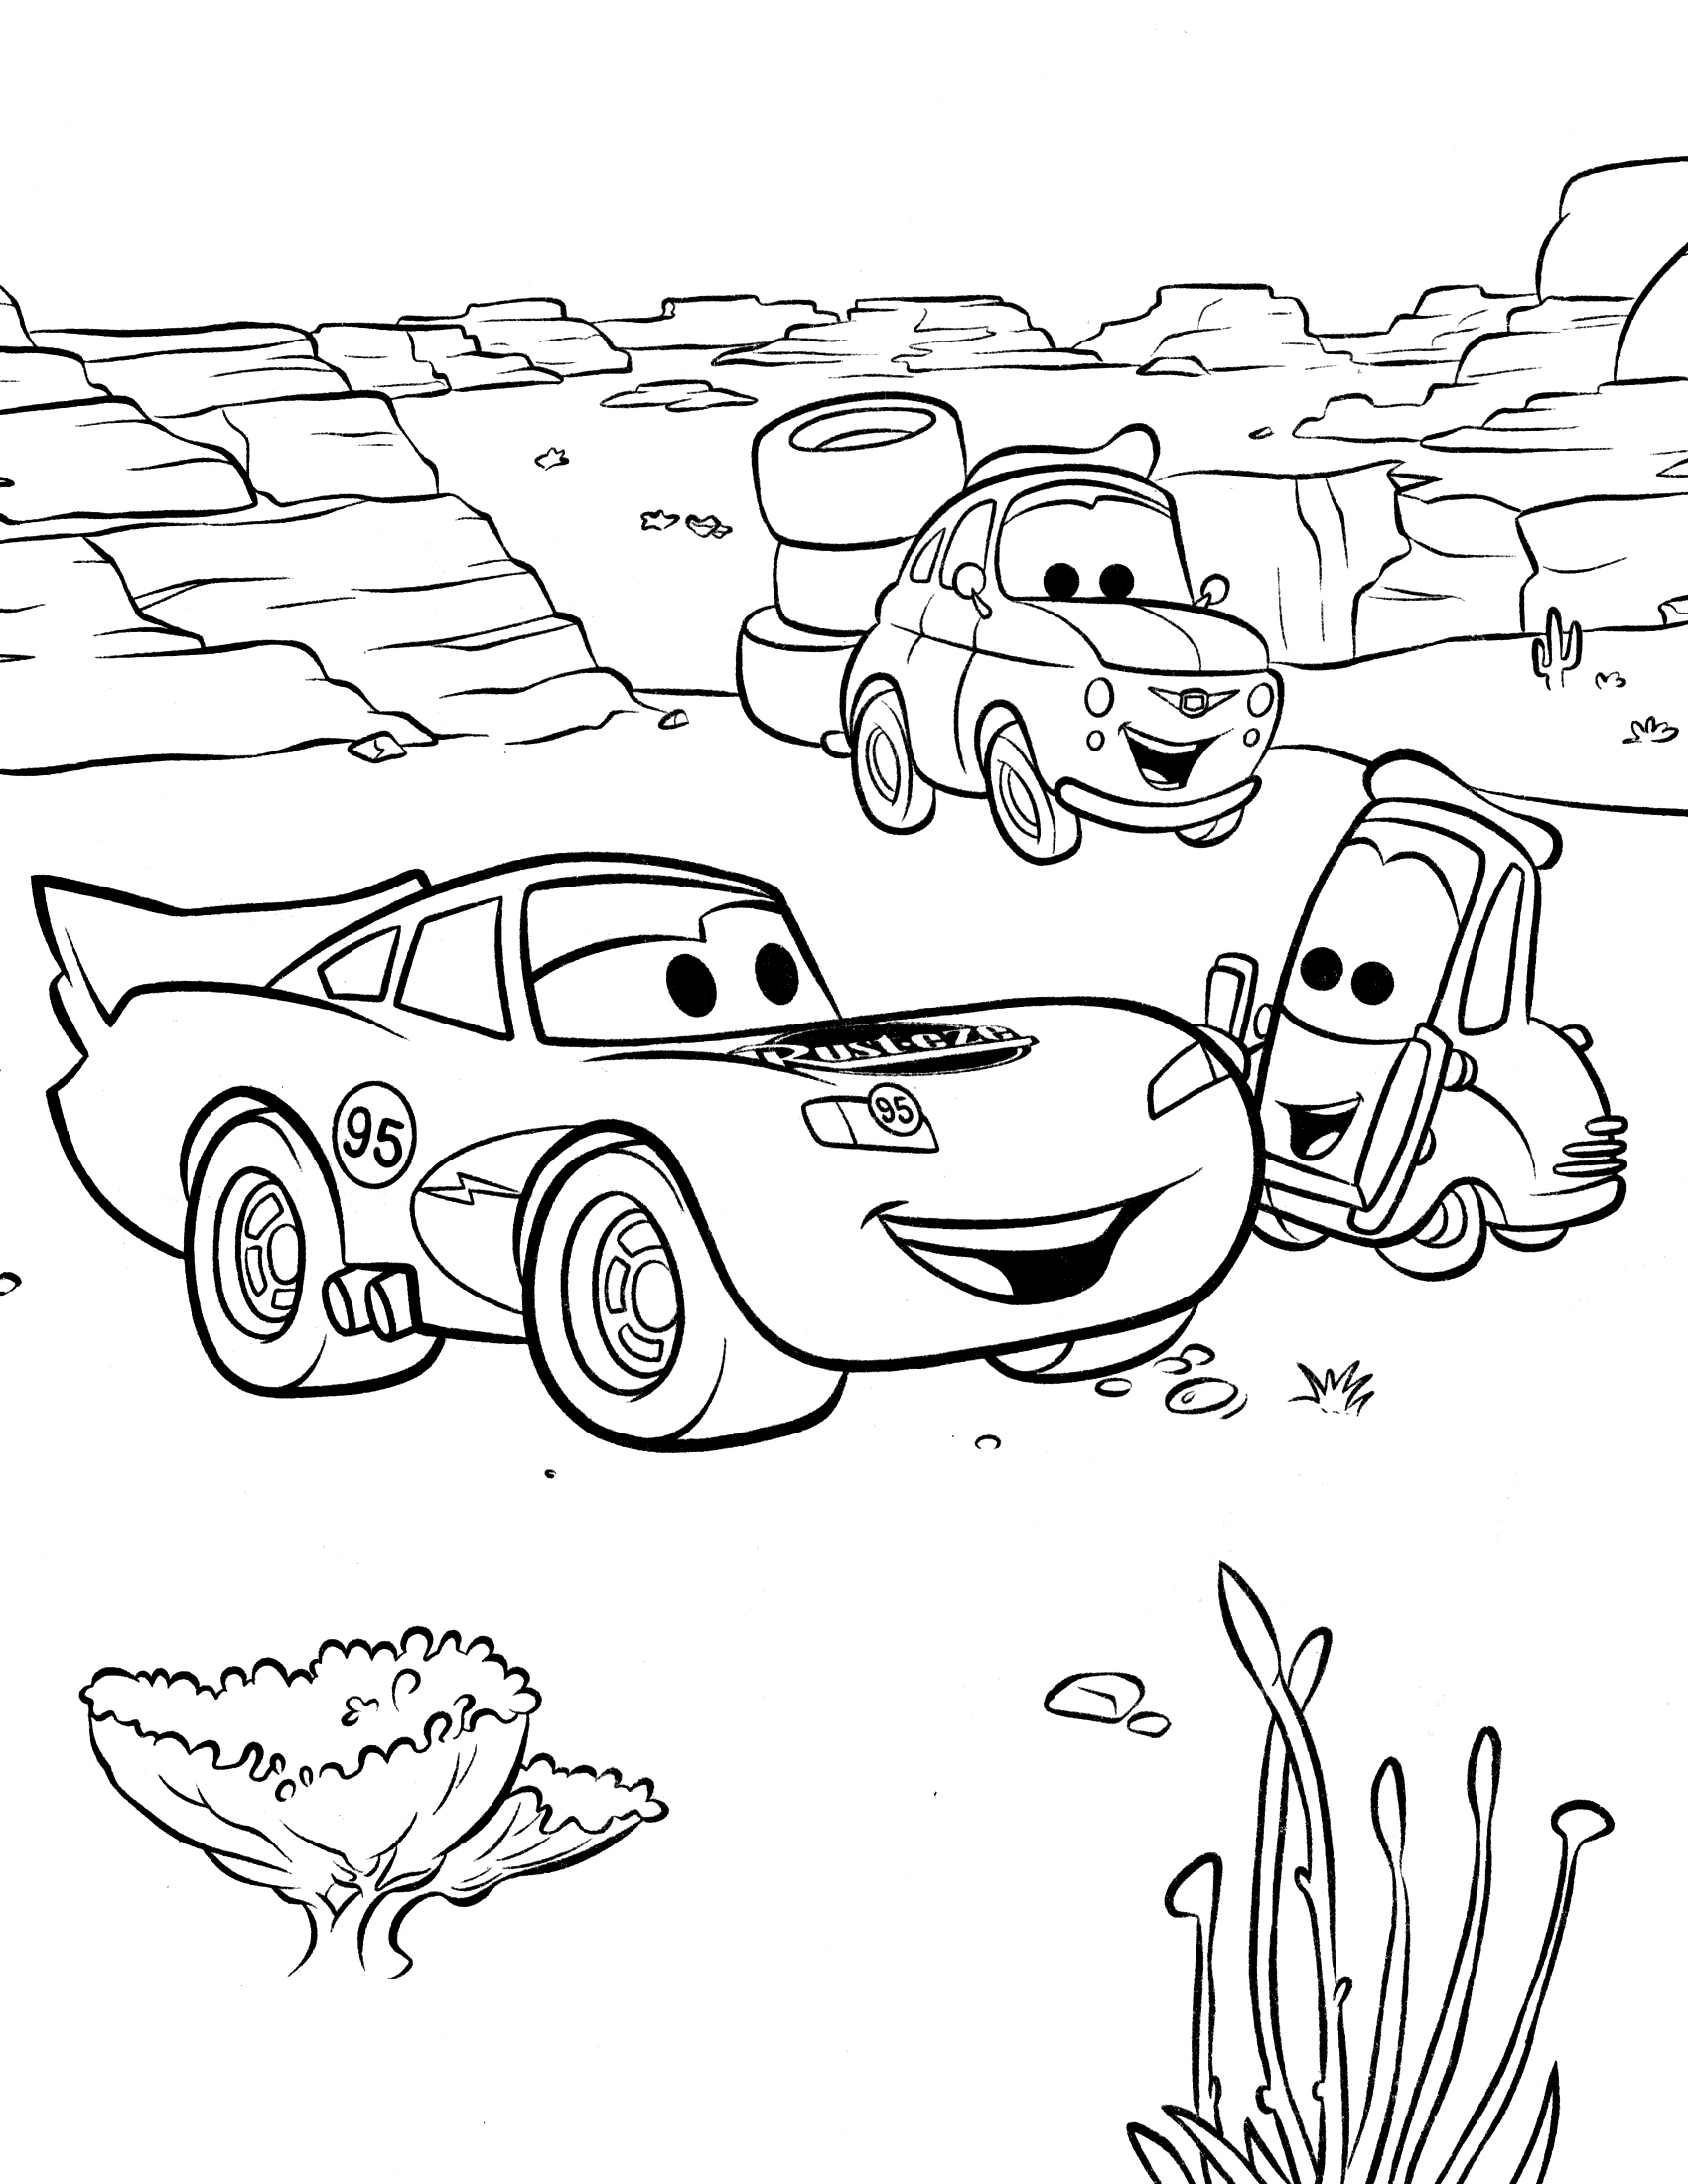 21-beautiful-picture-of-cars-3-coloring-pages-cars-3-coloring-pages